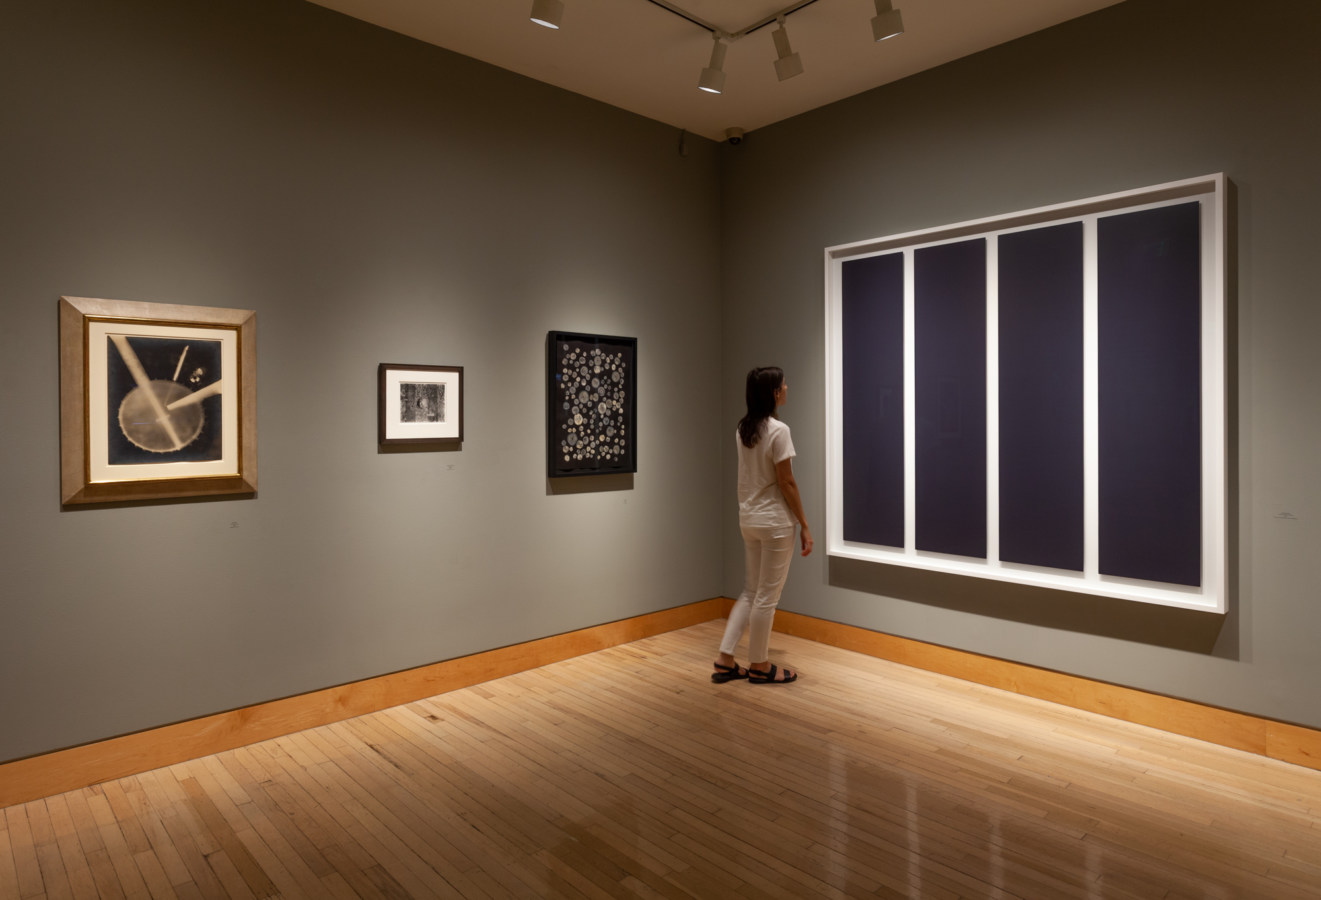 Color image of framed photographs in both color and black and white on grey gallery wall with person viewing work